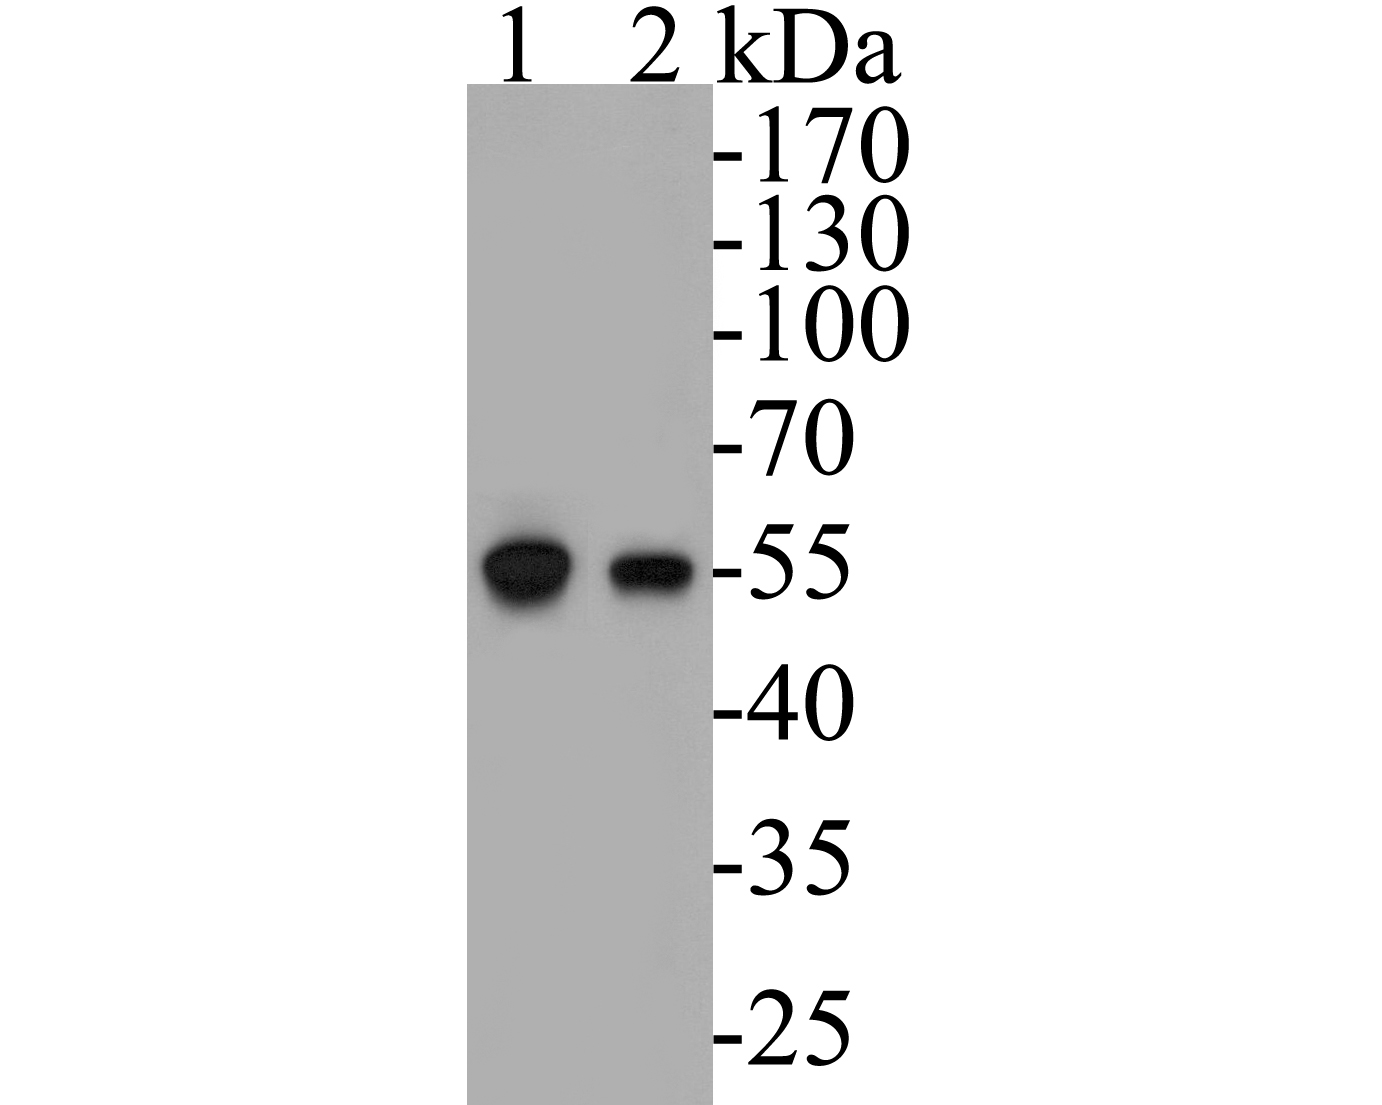 Western blot analysis of DFNA5/GSDME on different lysates. Proteins were transferred to a PVDF membrane and blocked with 5% BSA in PBS for 1 hour at room temperature. The primary antibody (EM1901-49, 1/500) was used in 5% BSA at room temperature for 2 hours. Goat Anti-Mouse IgG - HRP Secondary Antibody (HA1006) at 1:5,000 dilution was used for 1 hour at room temperature.<br />
Positive control: <br />
Lane 1: Hela cell lysate<br />
Lane 2: HepG2 cell lysate